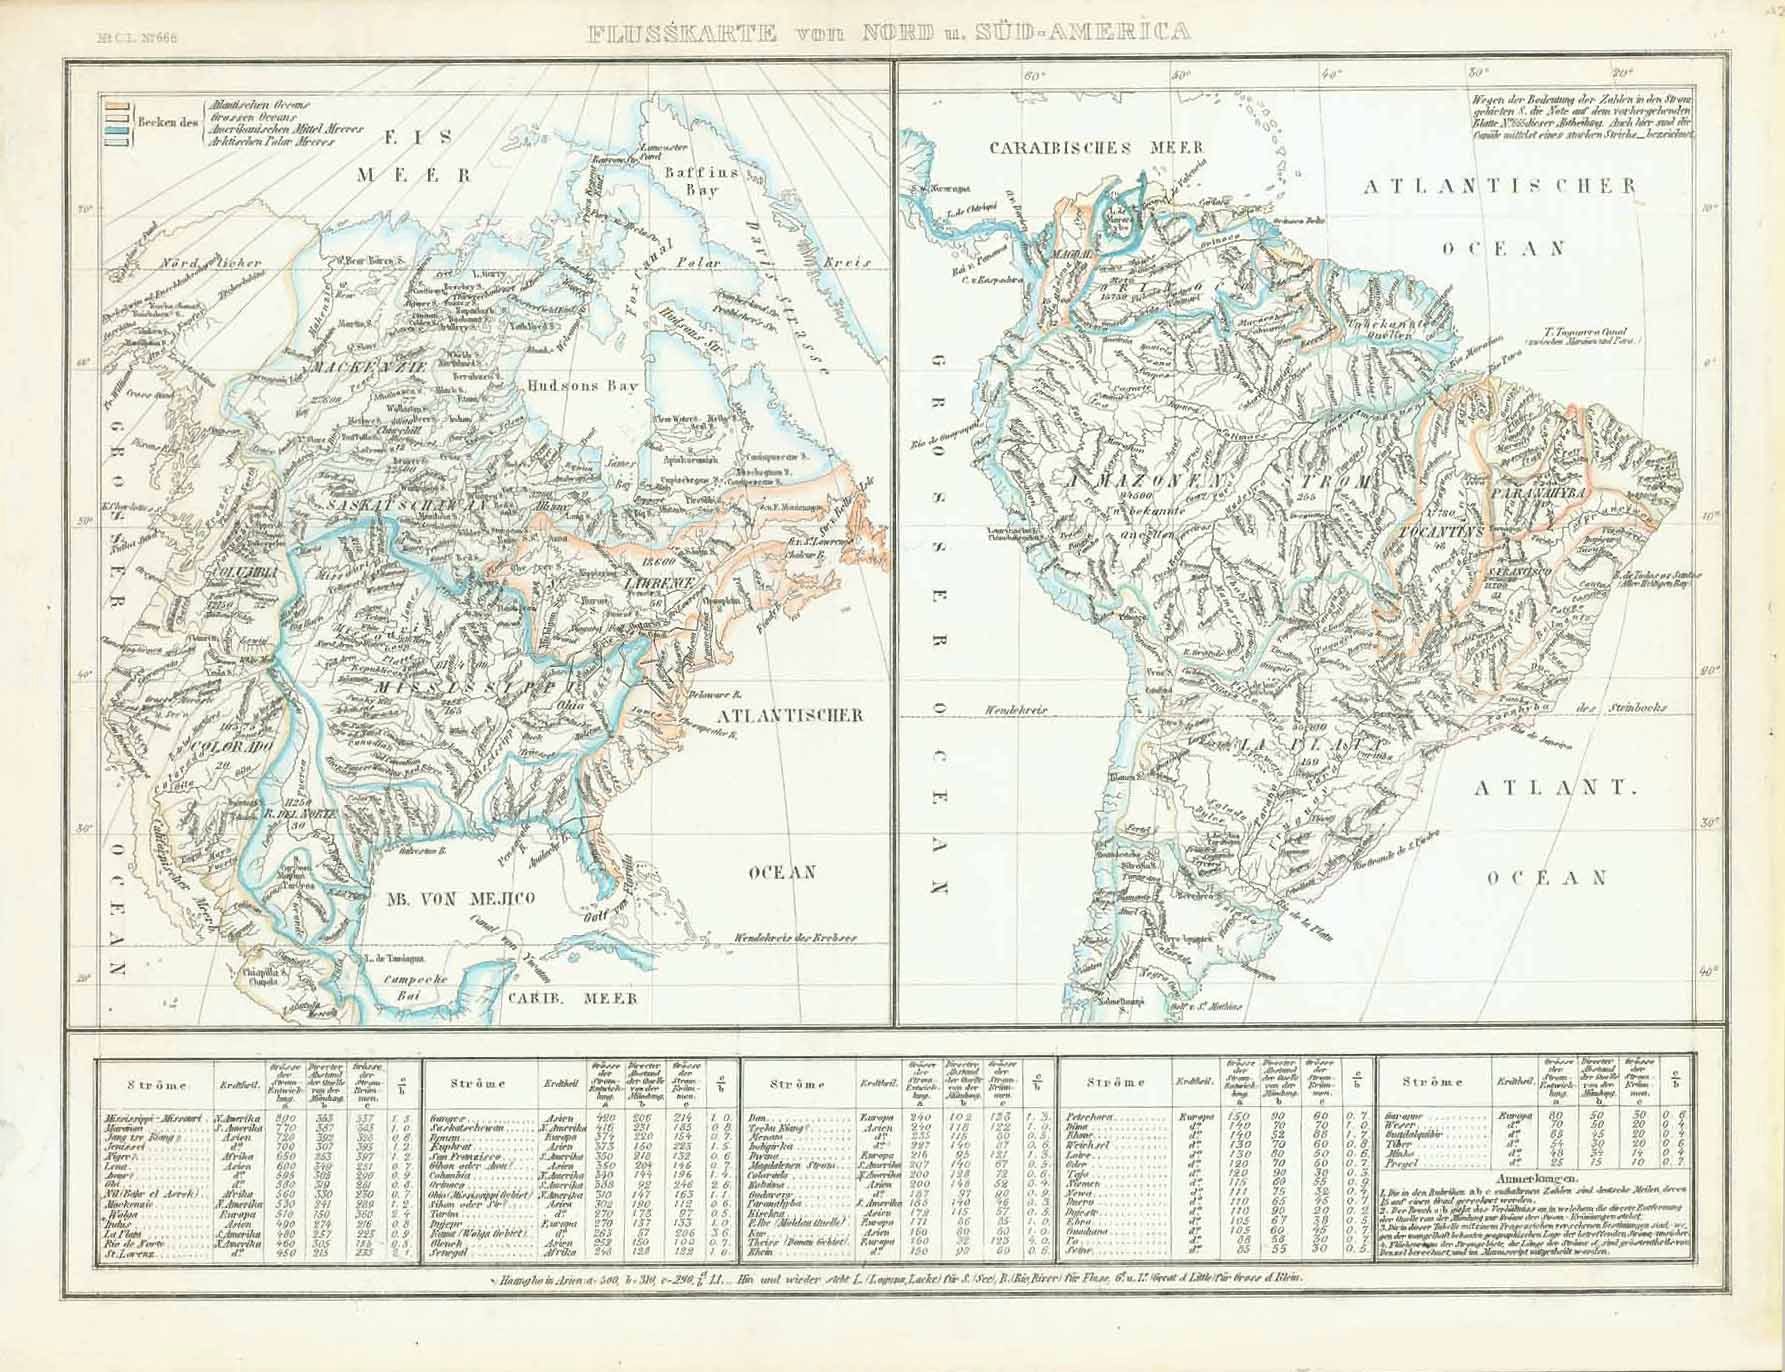 "Flusskarte von Nord u. Sued-America" (River map of North and South America)  Steel engraving map publish 1859. Original outline coloring. Below the map image are tables of the major rivers of the world with statistics showing length and other information.  Original antique print  